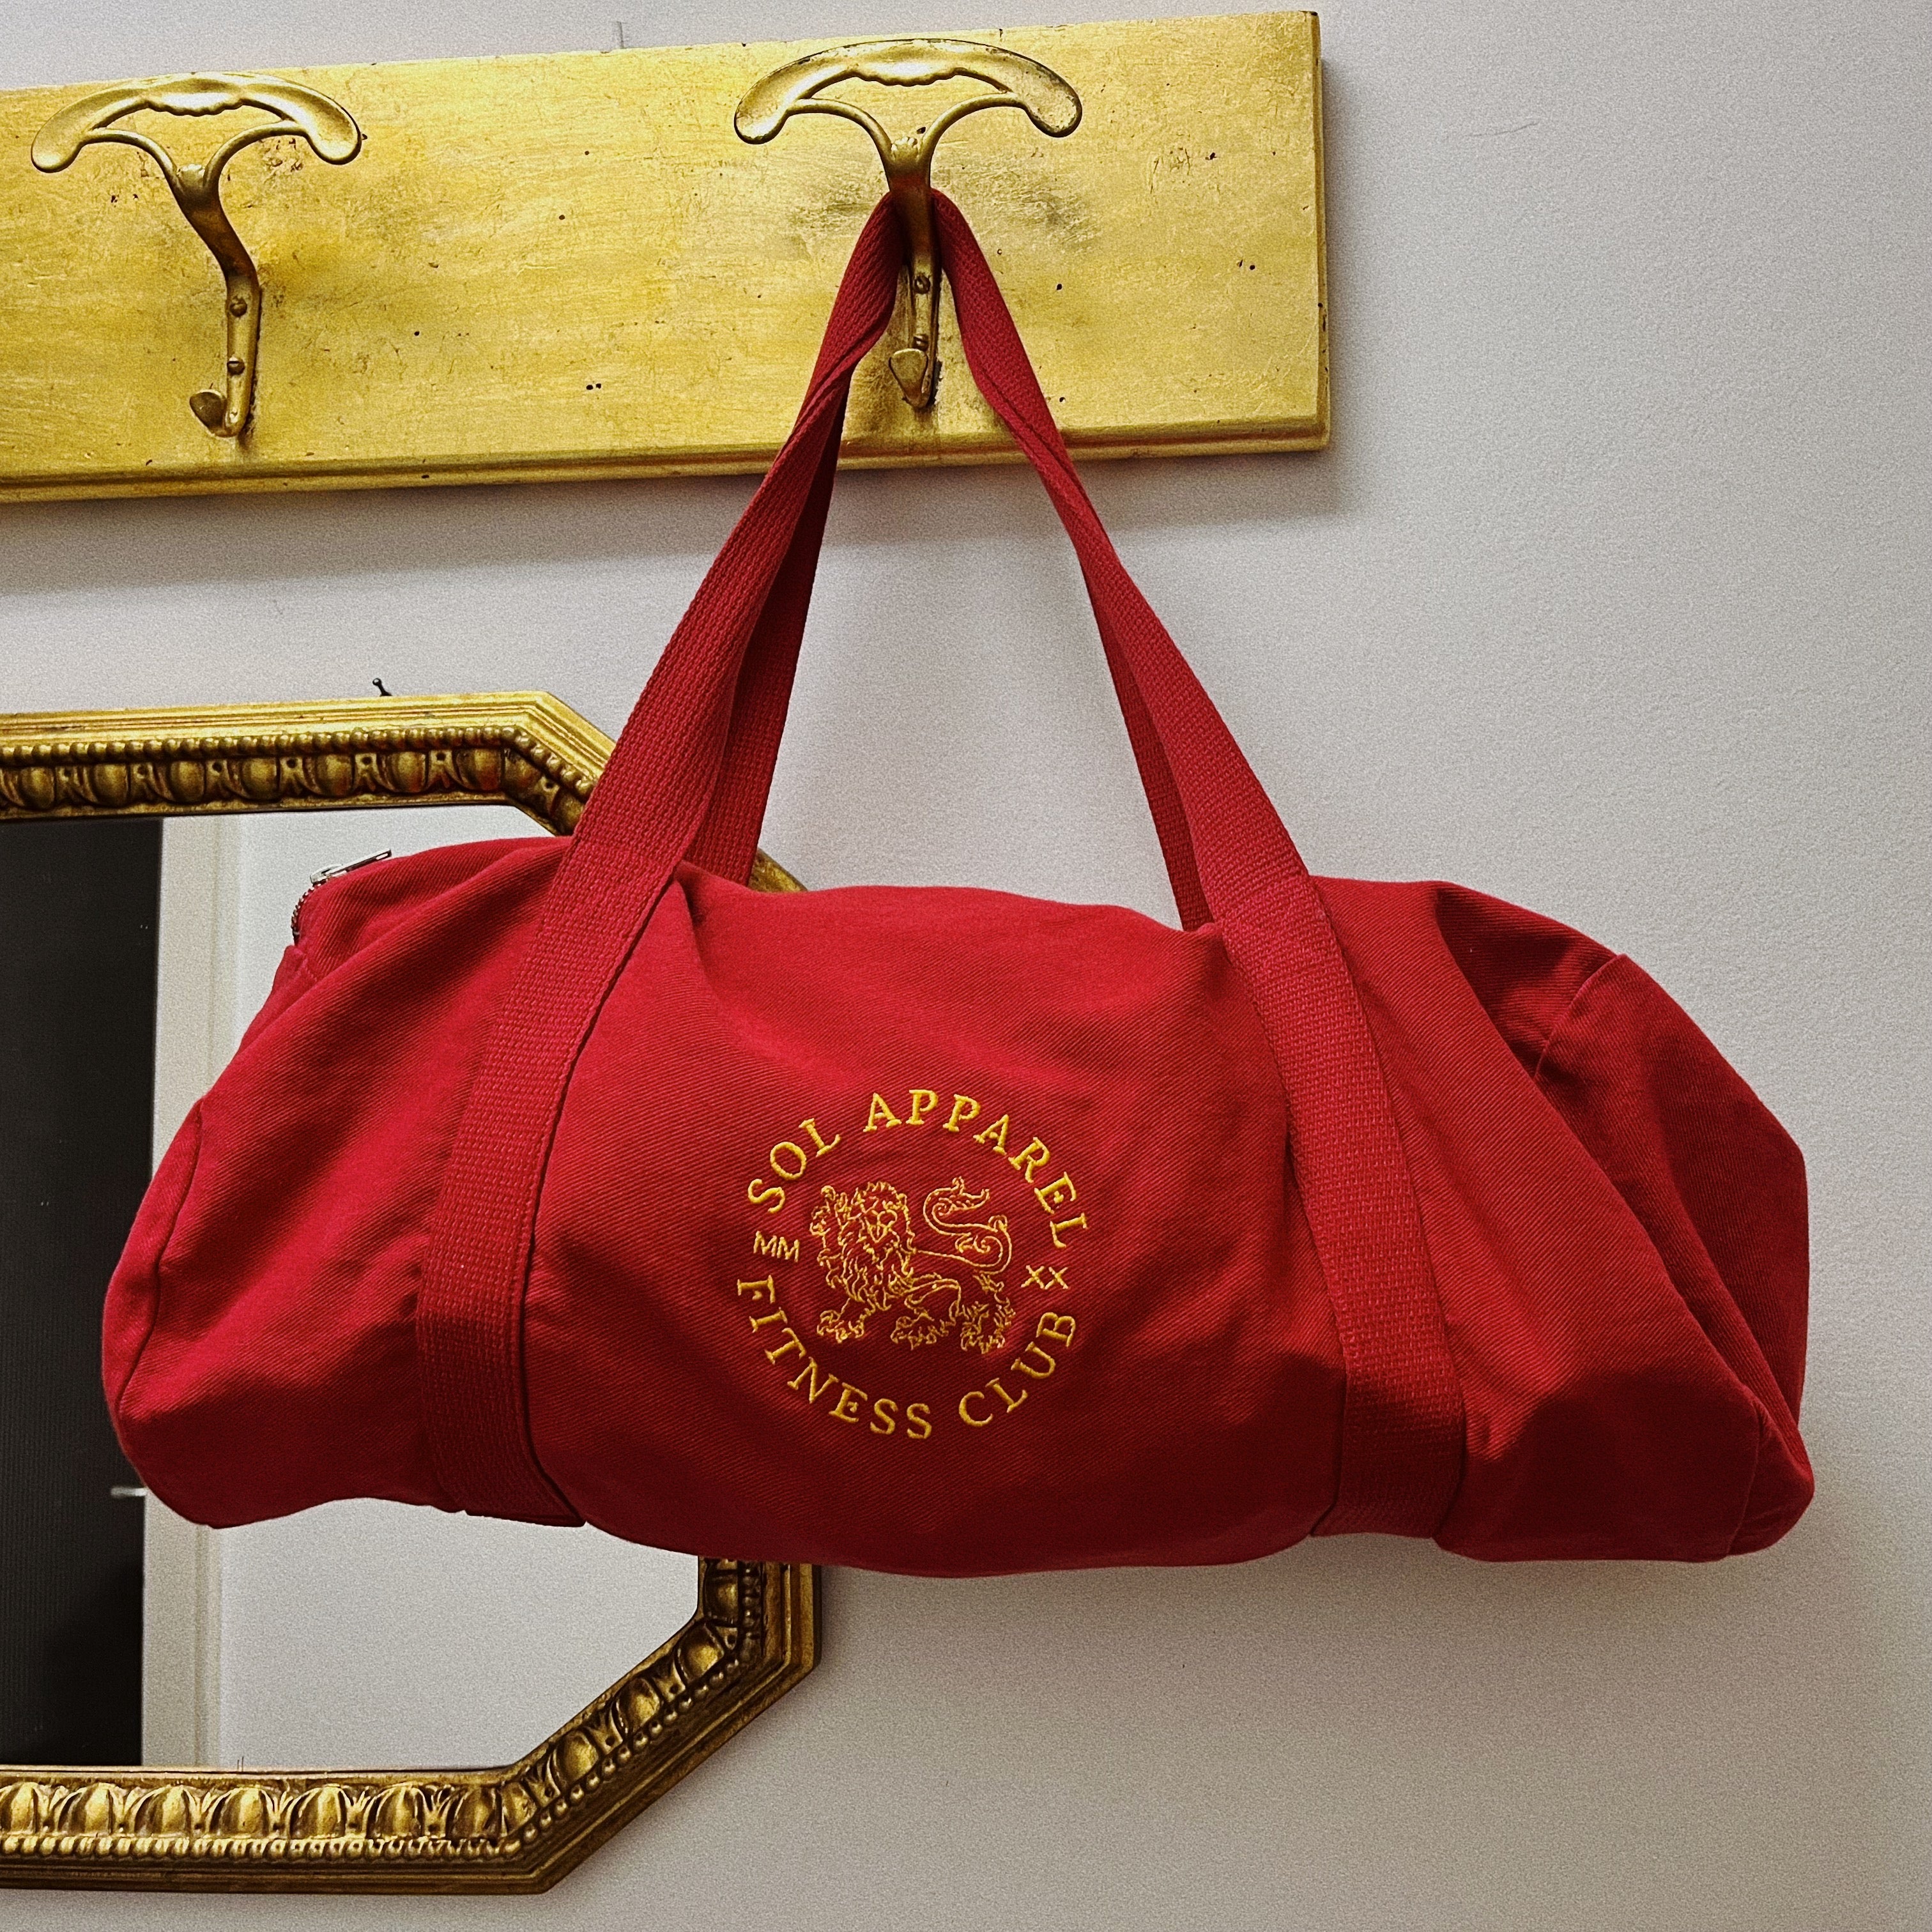 red gym duffel bag with golden logo of lion embroidered hanging from a hook in a house with white walls